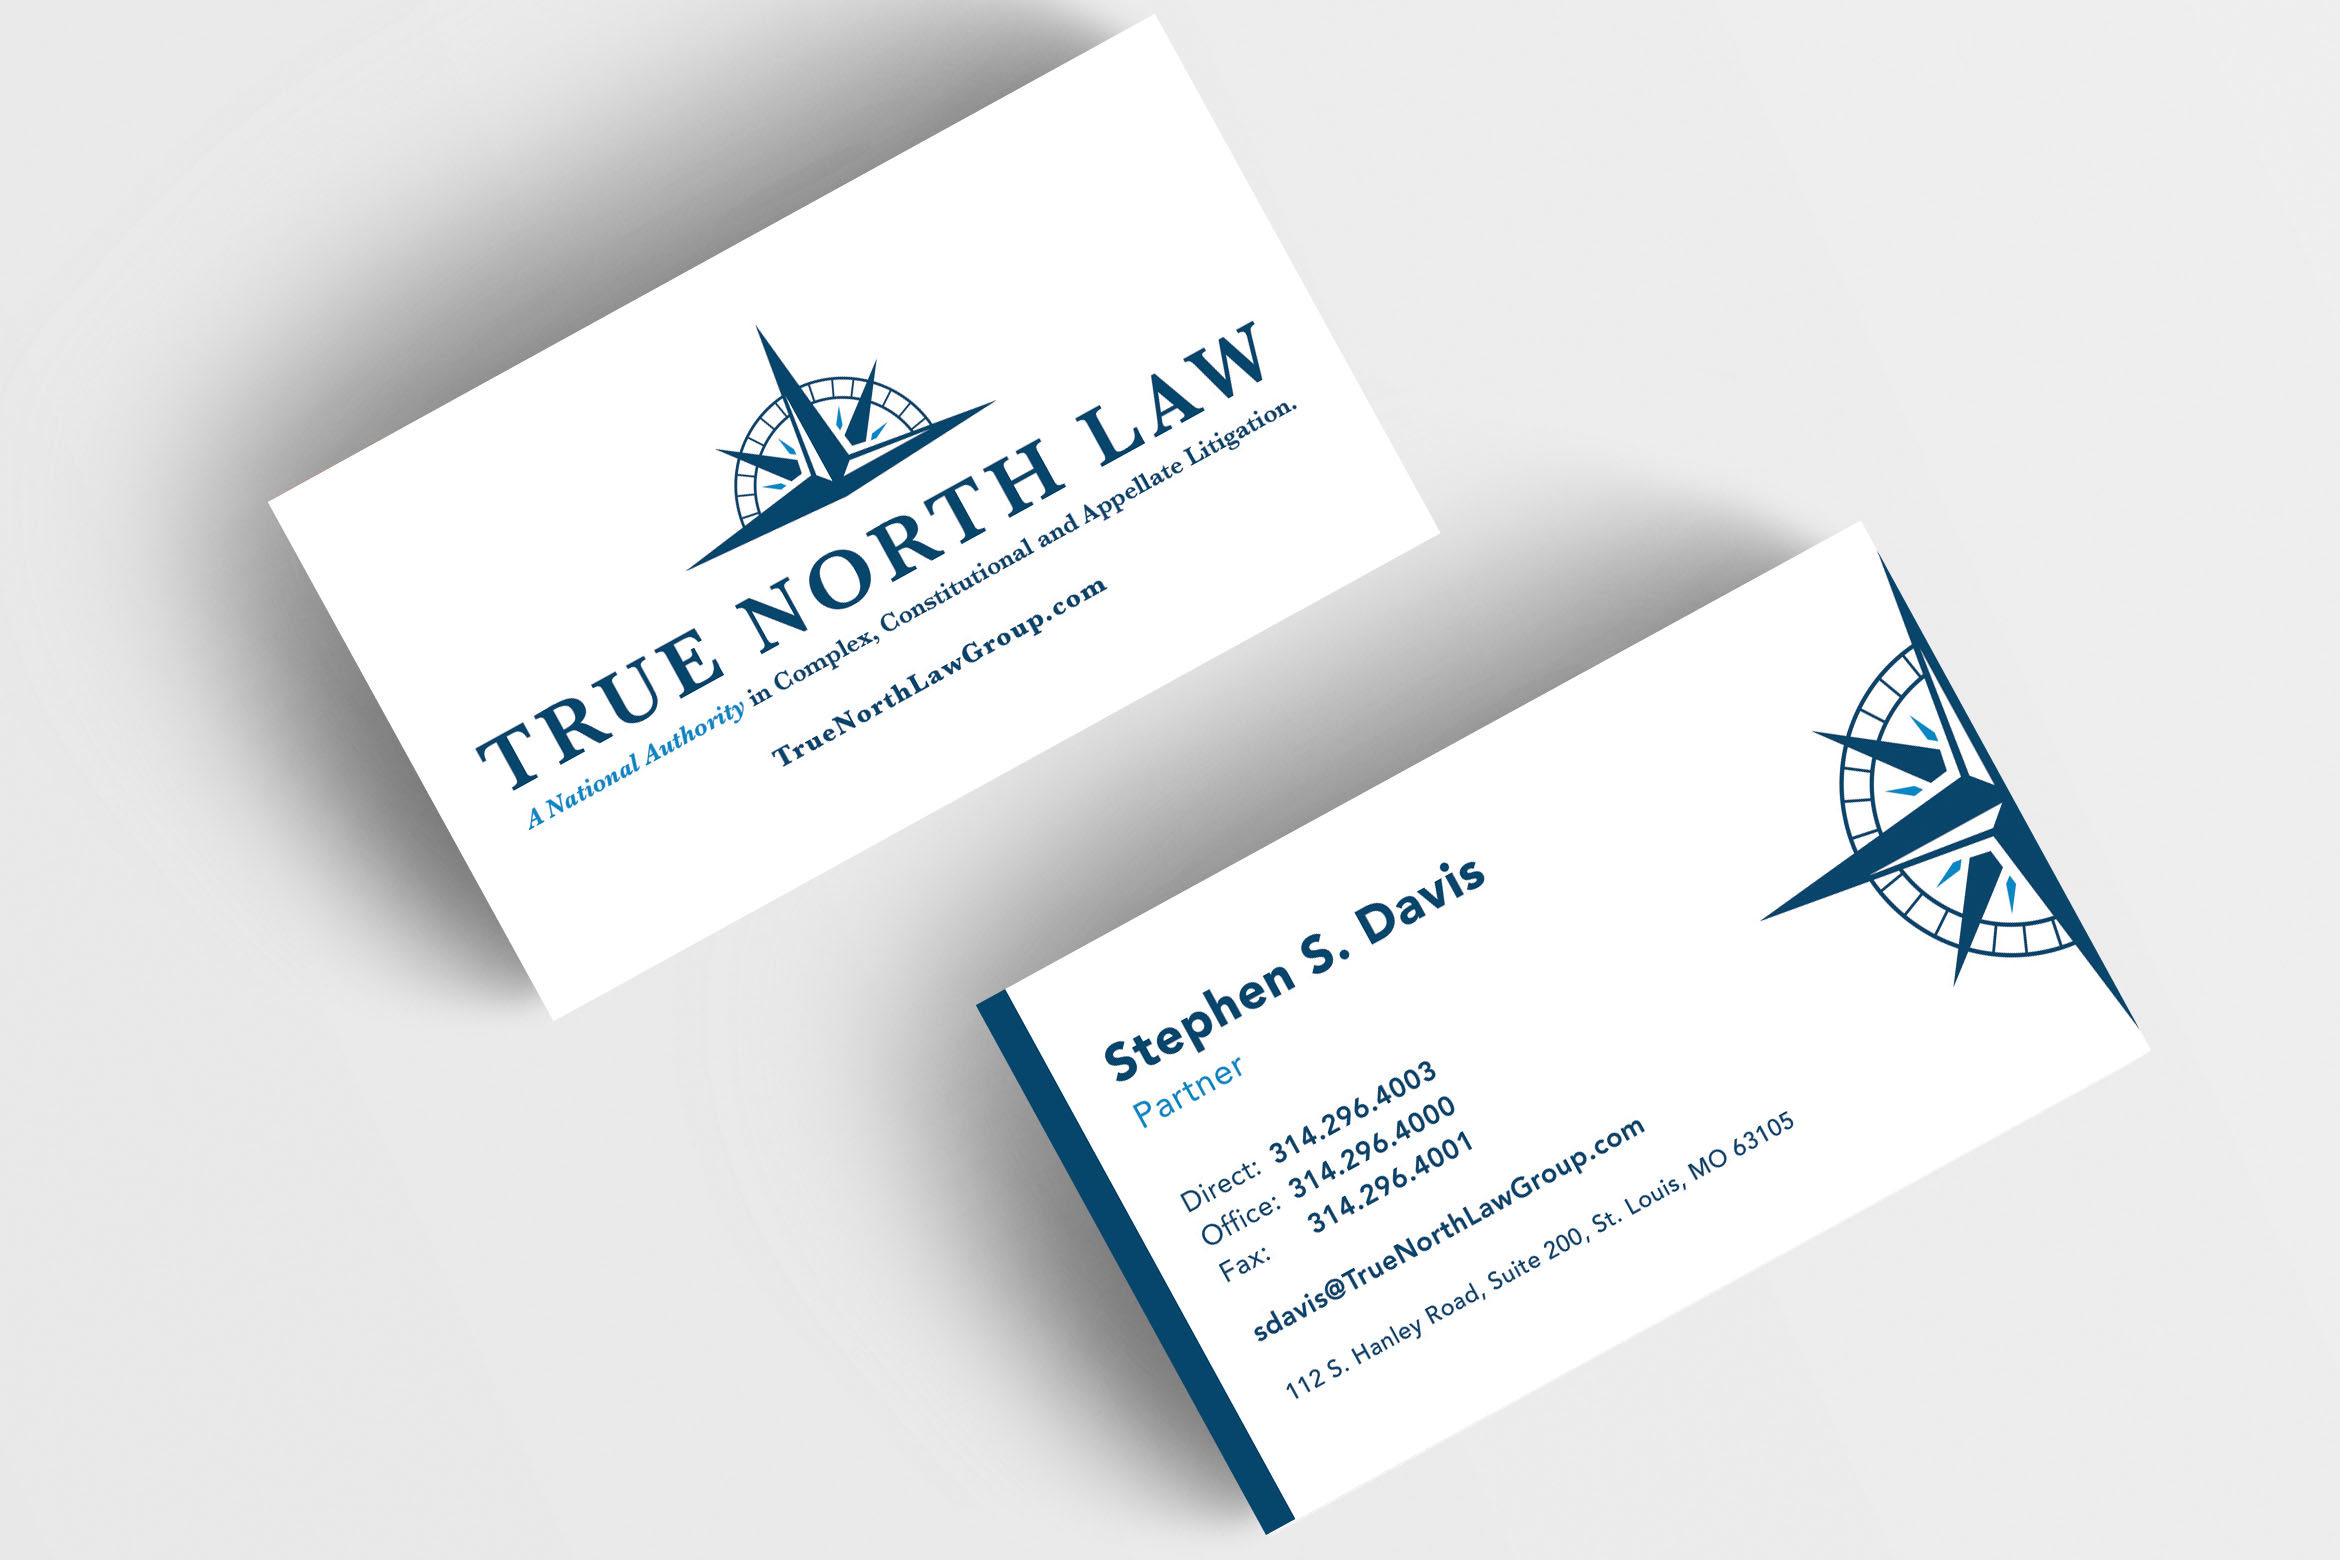 True North Law Group - Legal Back Office